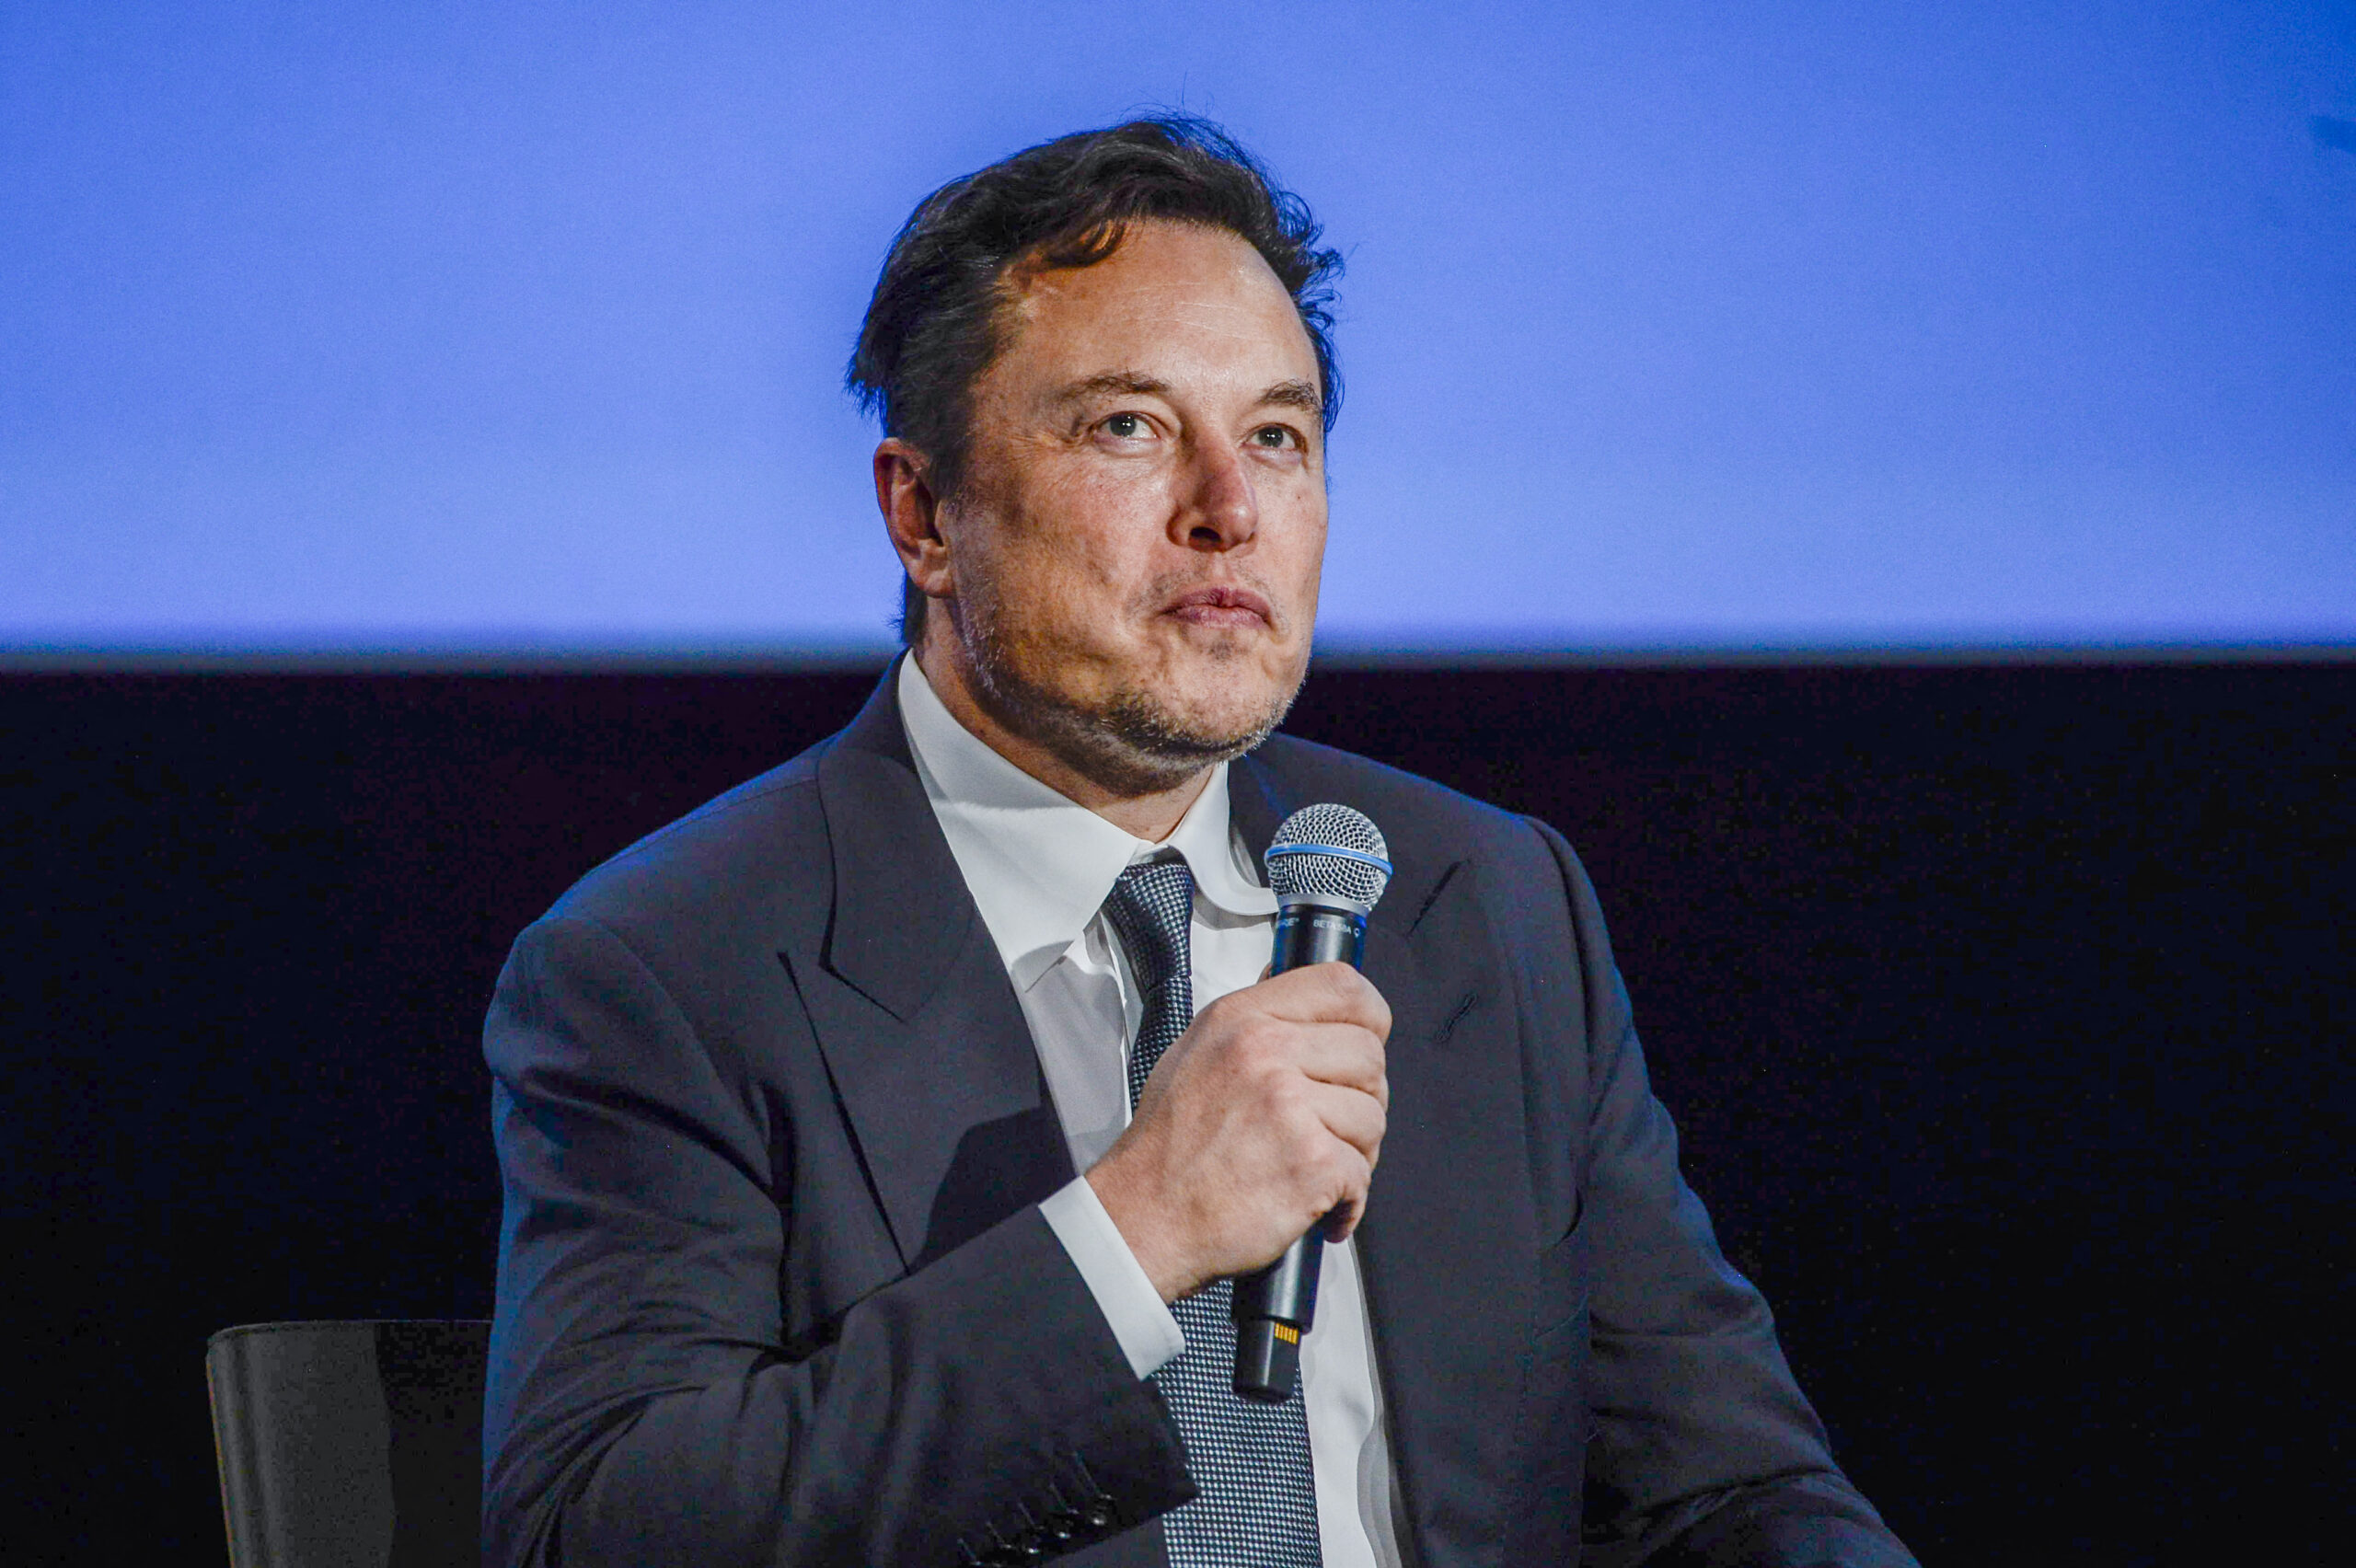 Elon Musk at a meeting in Stavanger, Norway on August 29, 2022. | Photo by Carina Johansen/ Getty Images